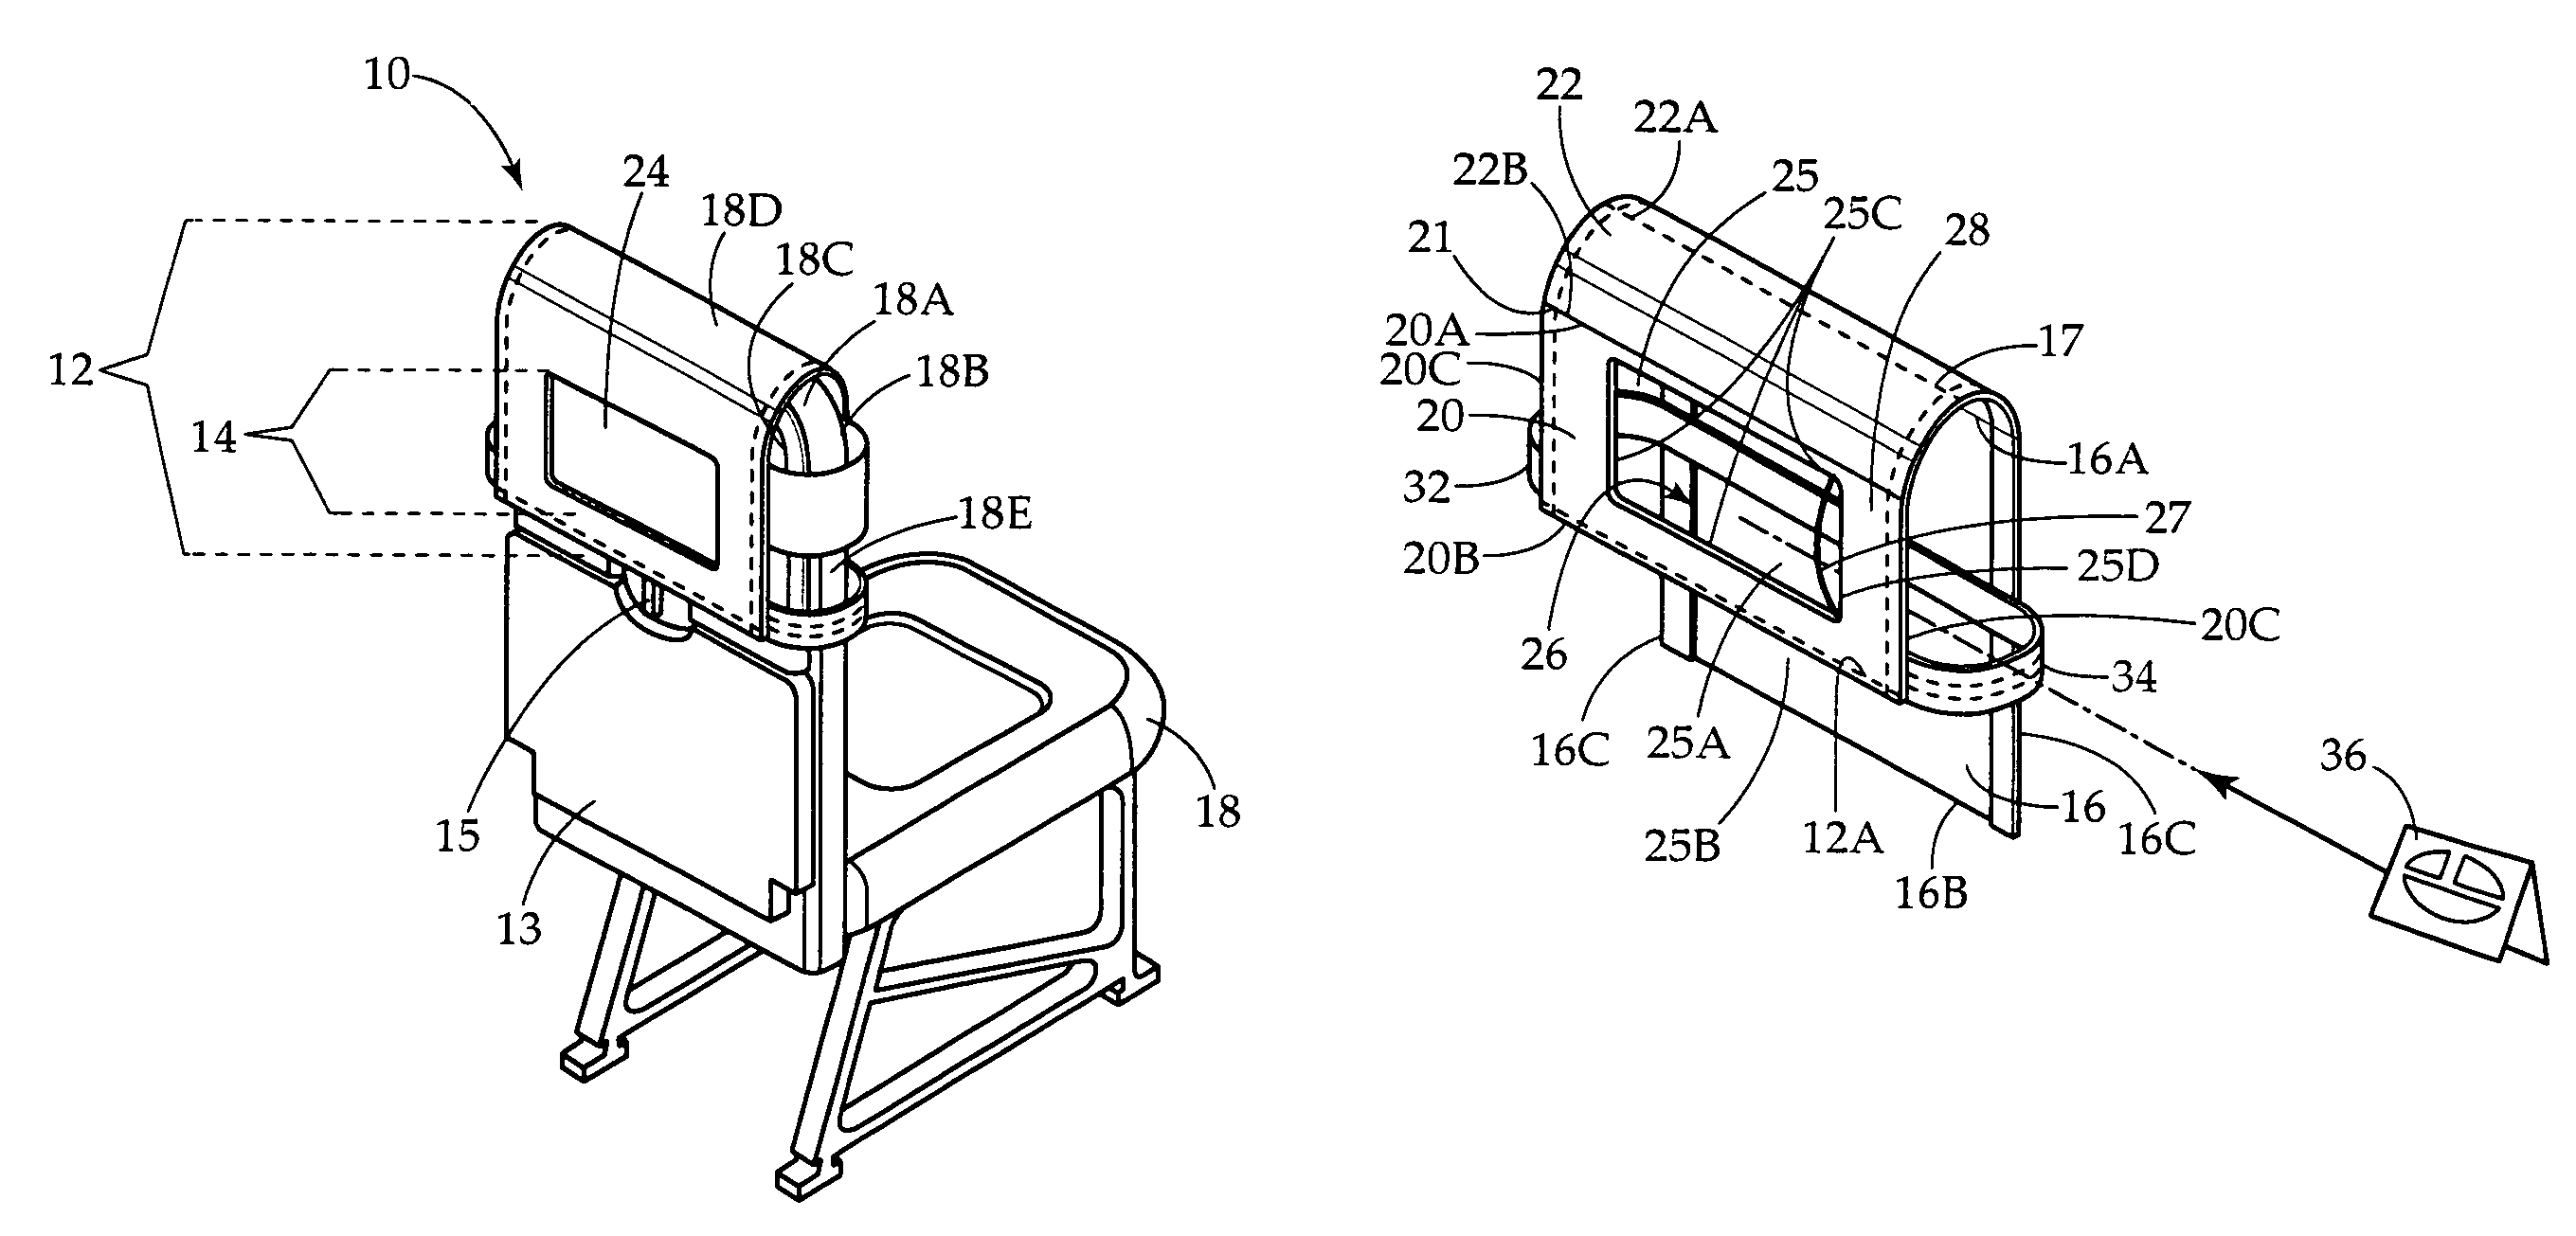 Seat headrest cover for use as a display device